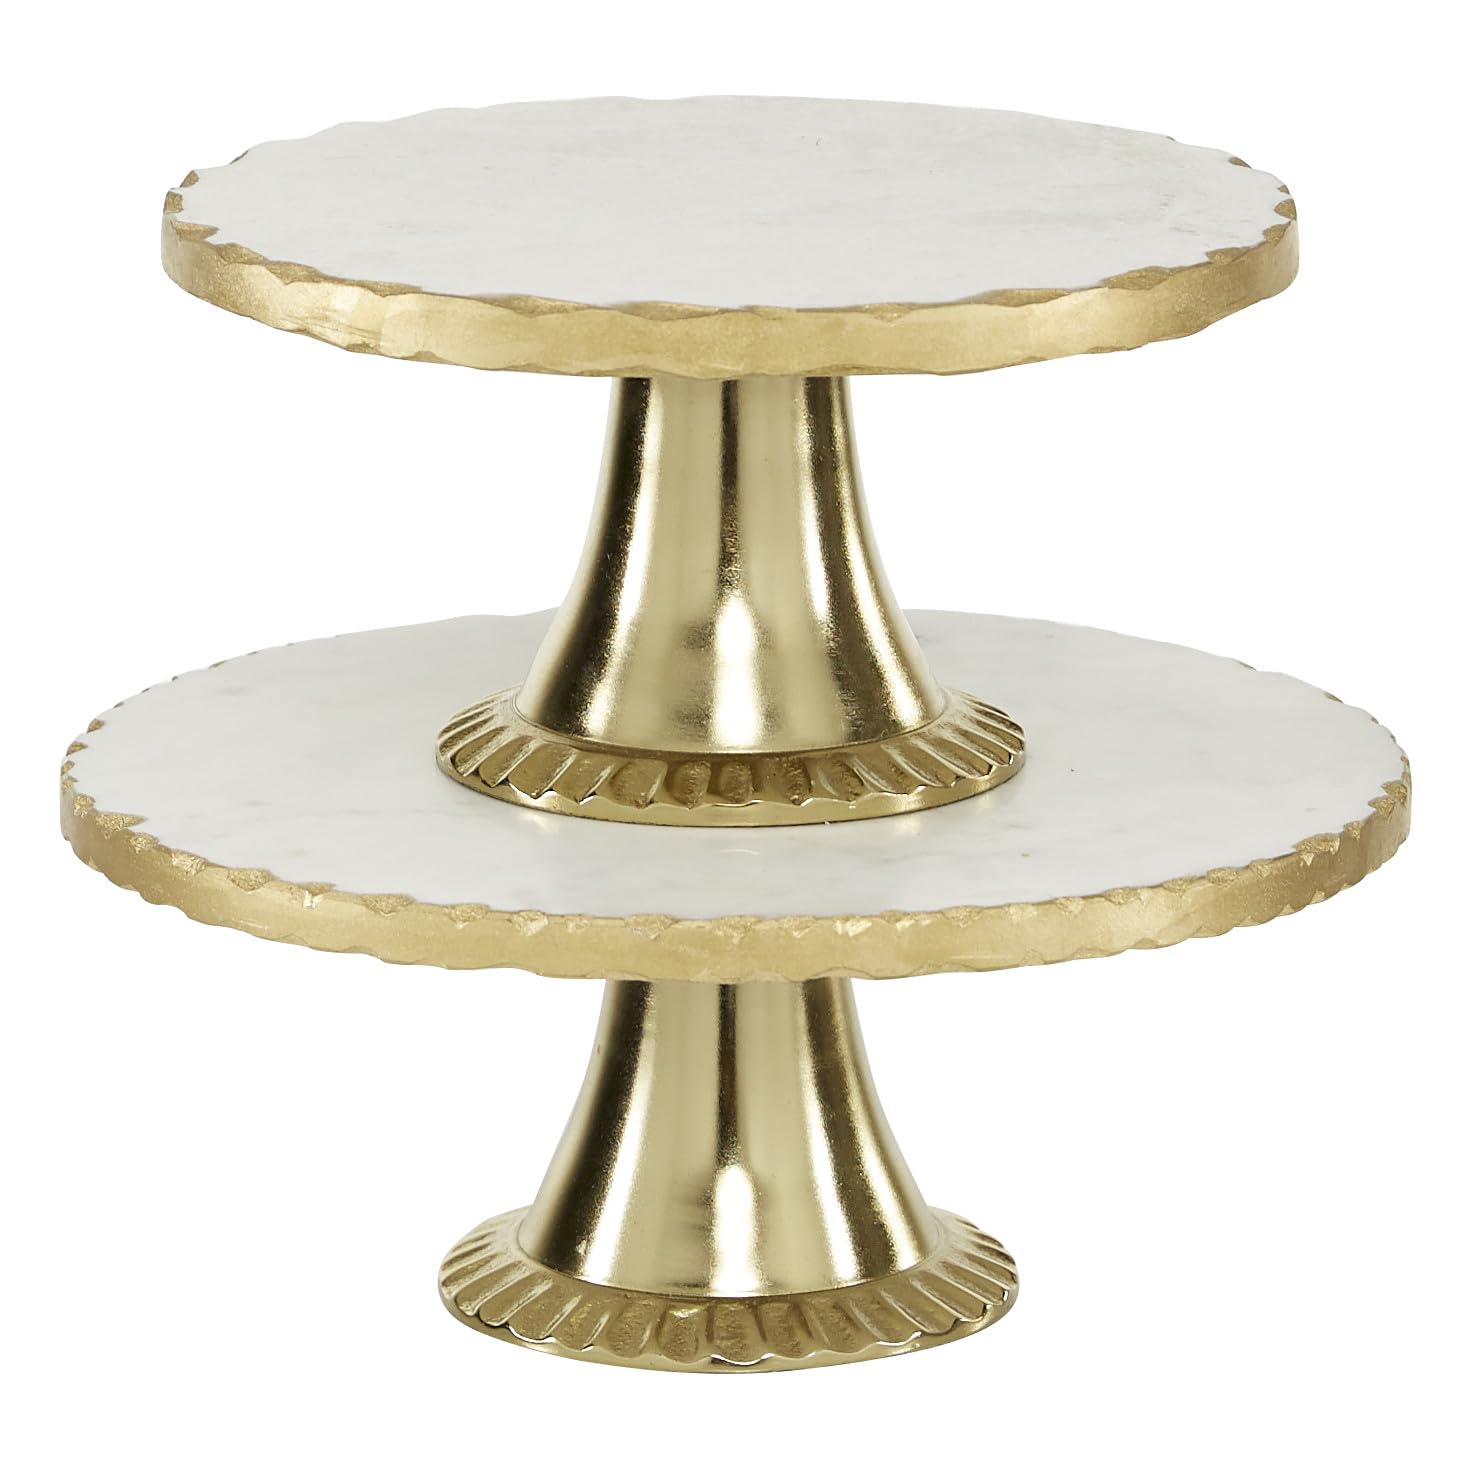 Deco 79 Marble Cake Stand with Gold Base, Set of 2 12", 10"W, White